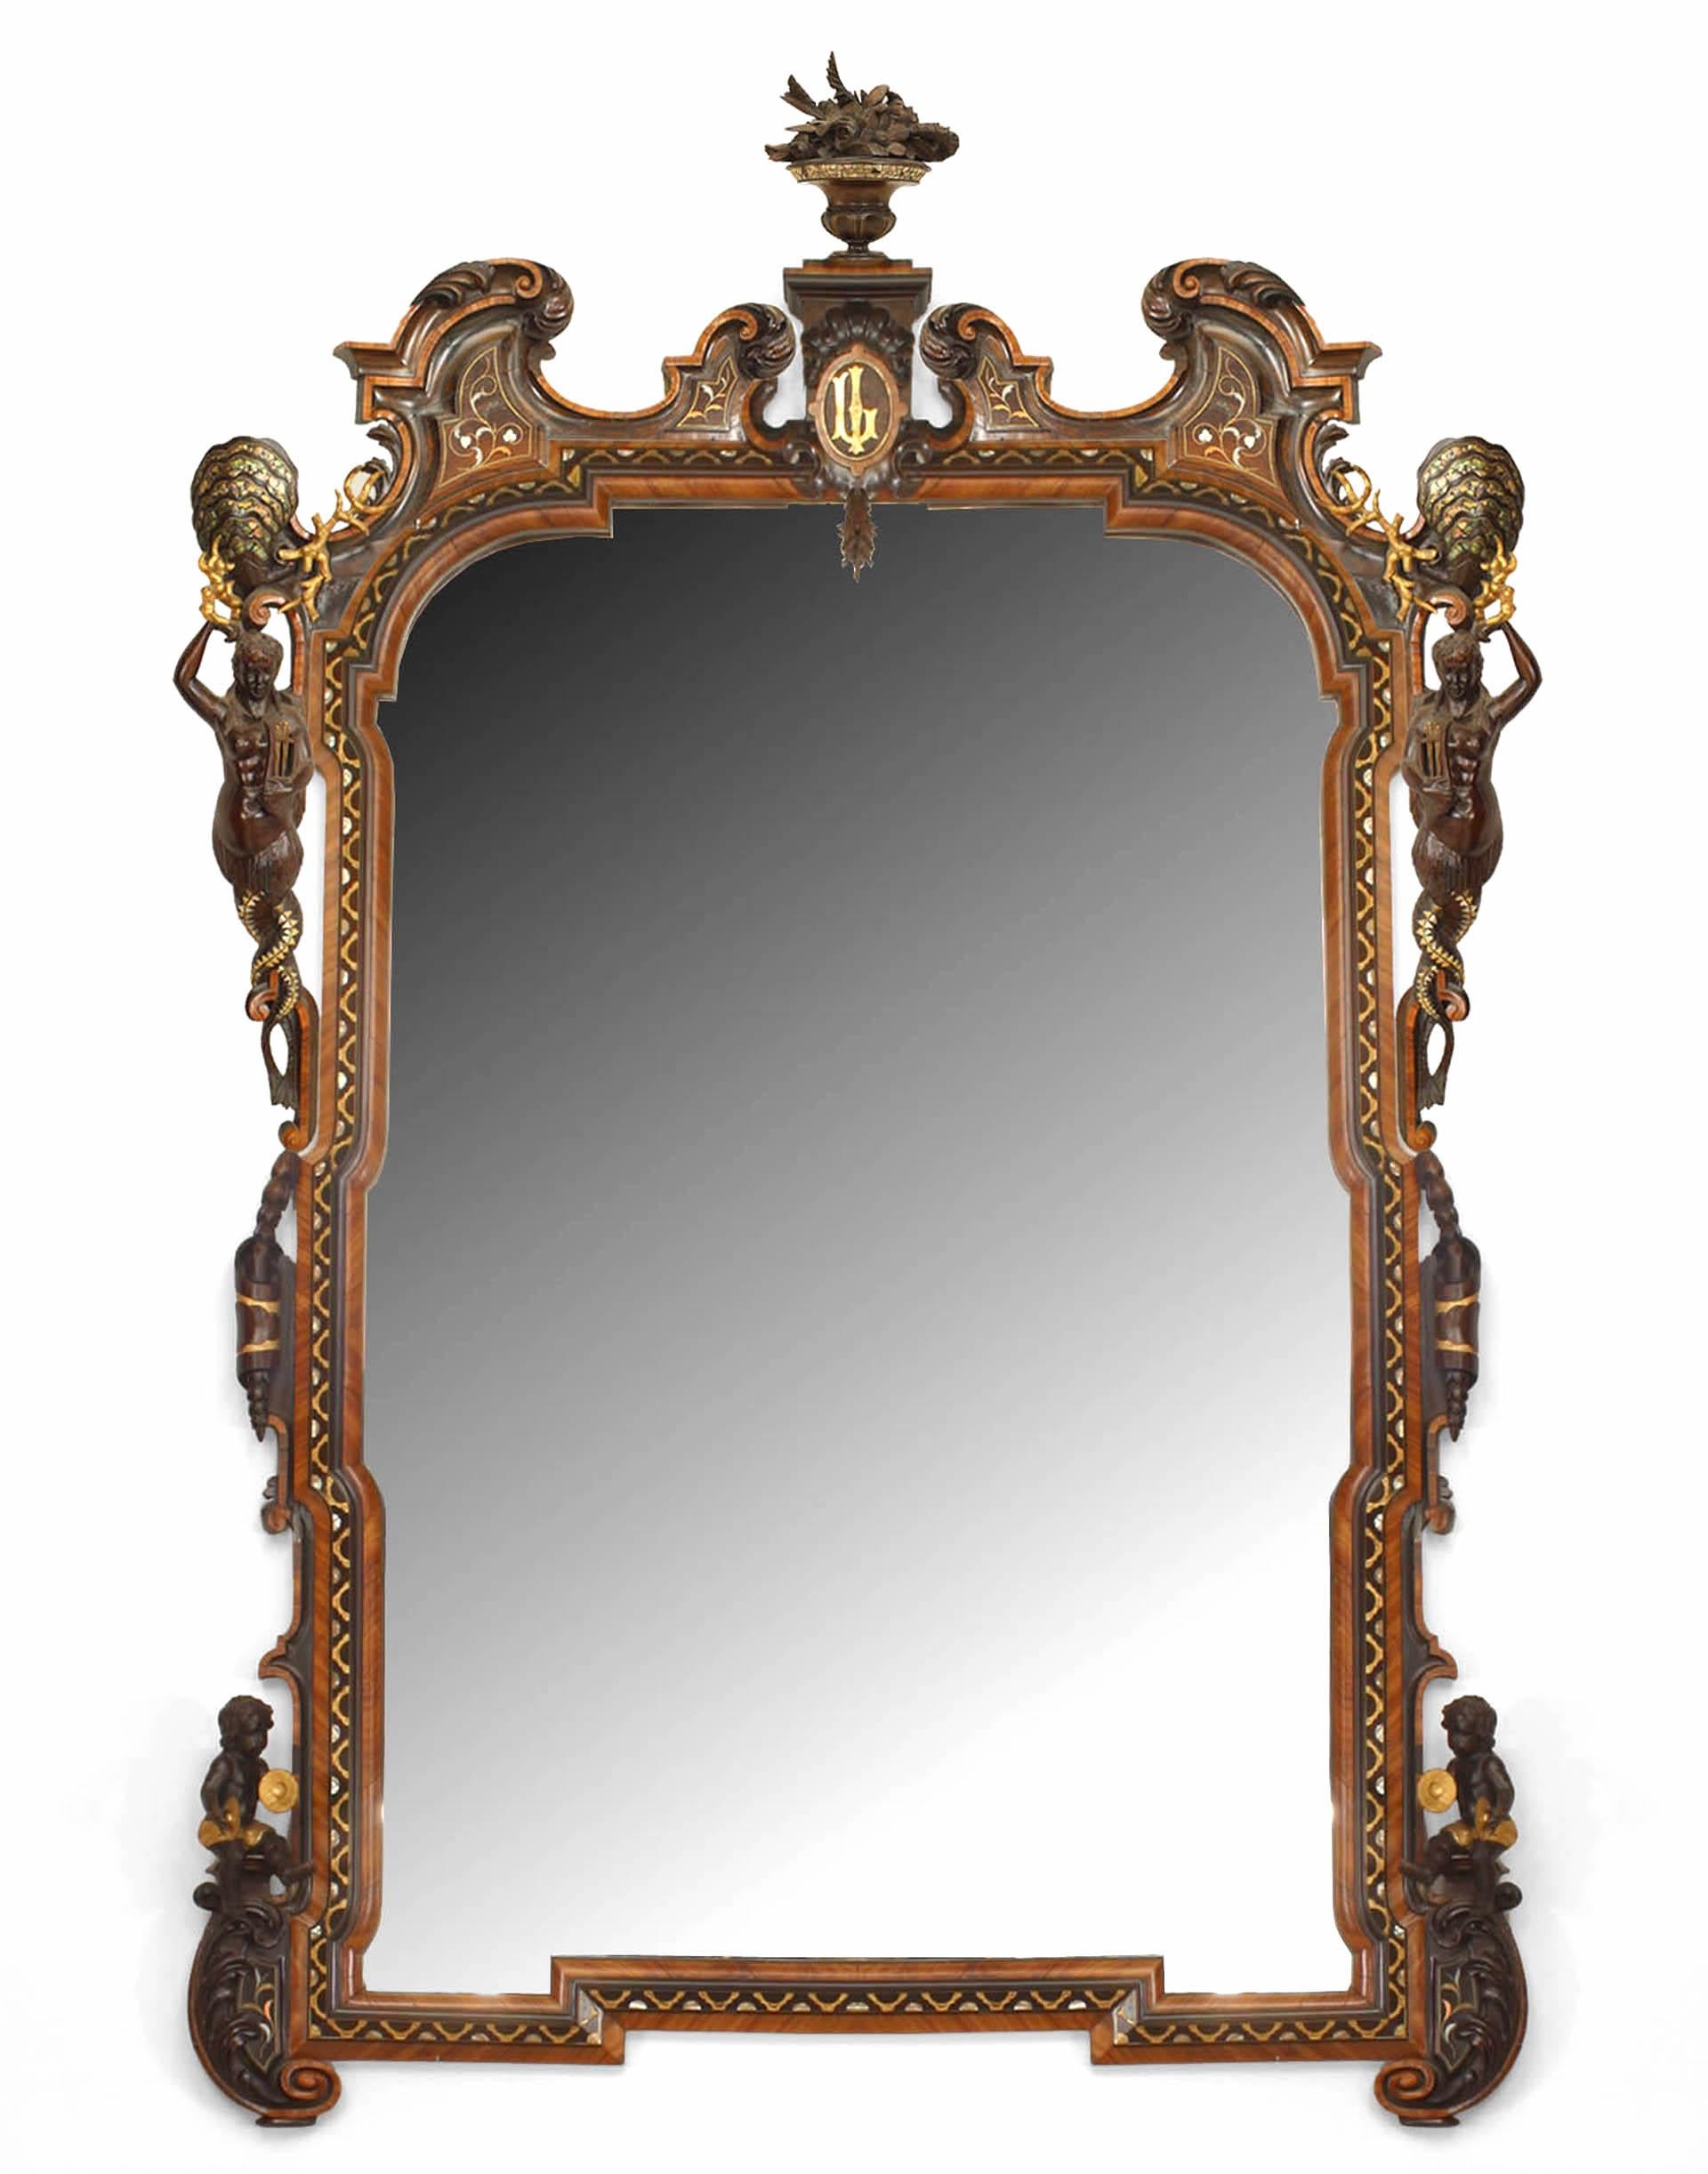 Pair of Italian Rococo Revival-style (19th century) rosewood wall mirrors with carved figures and kingwood, brass, and mother of pearl inlay. (in the manner of Gotti) (priced as pair).